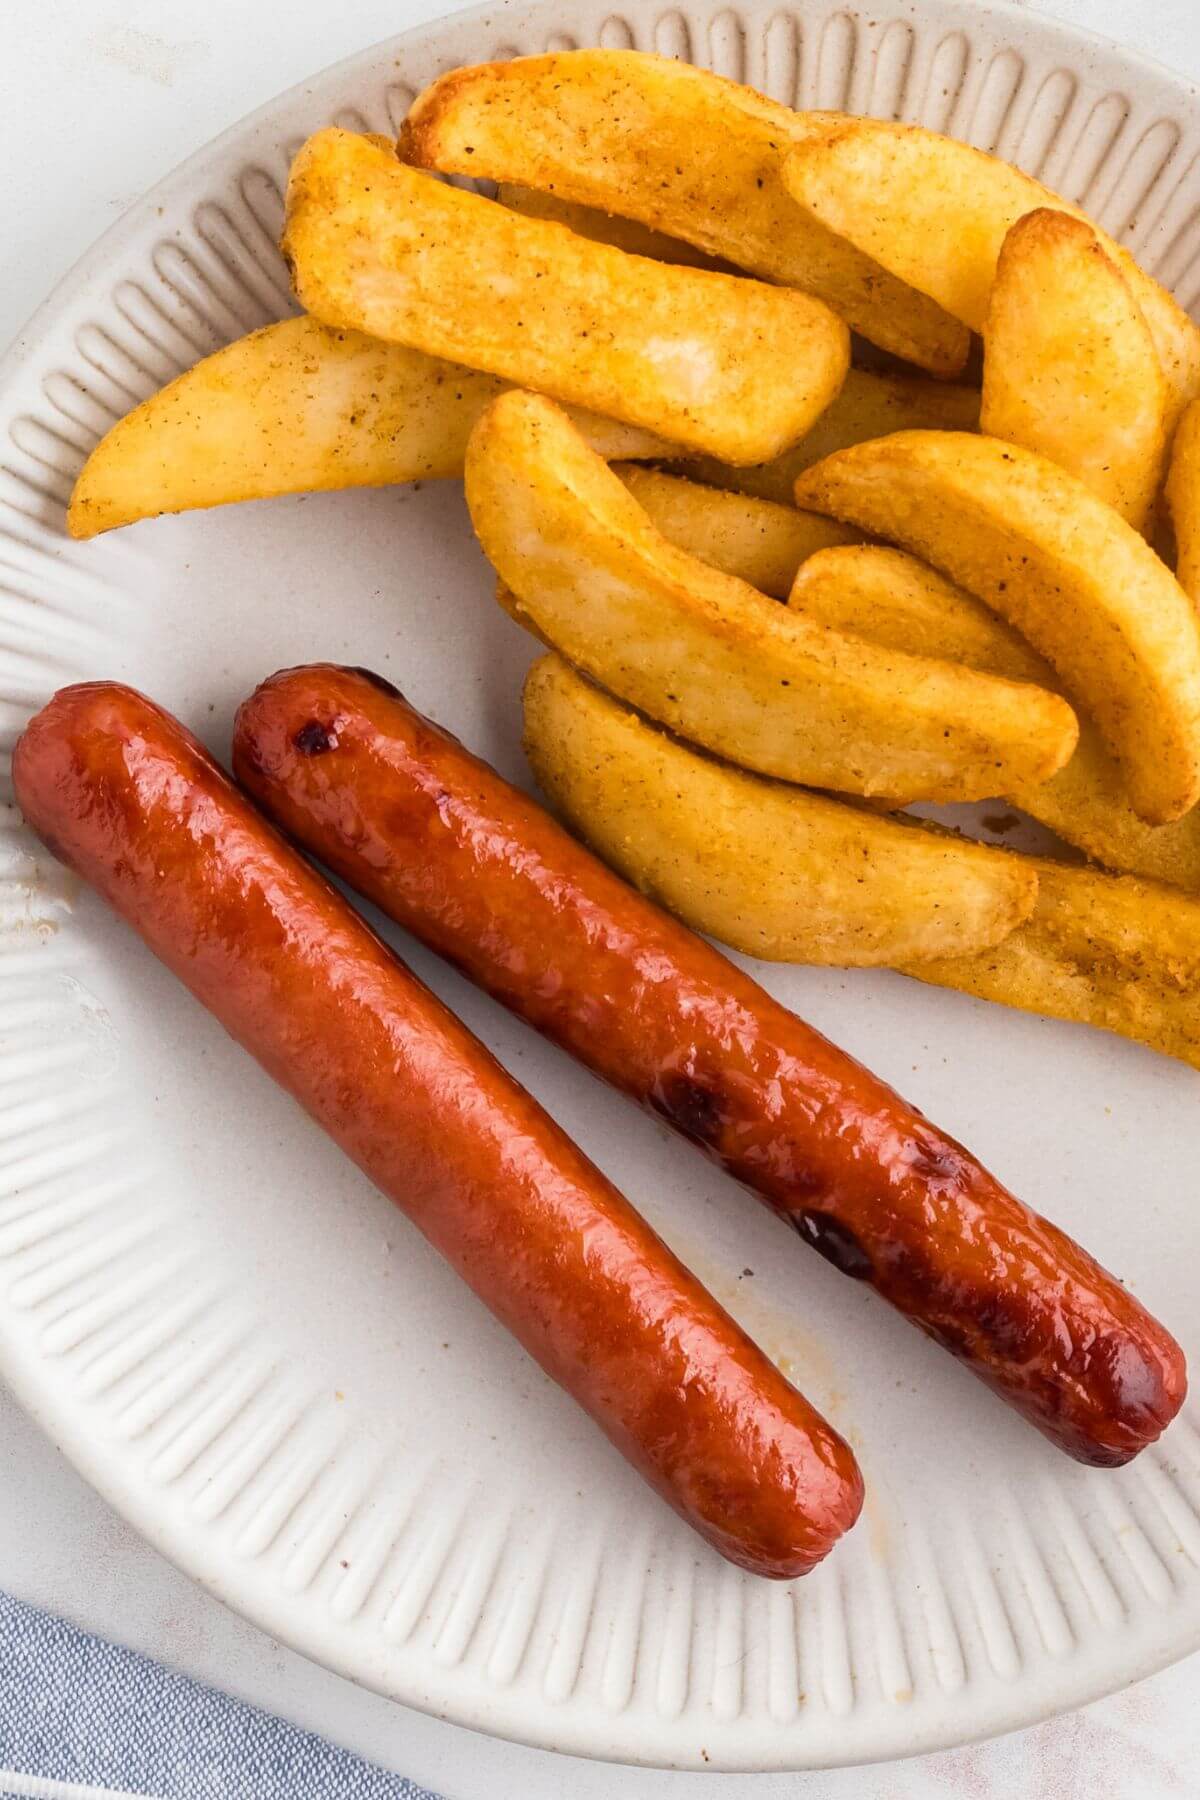 Juicy cooked hot dogs on a white plate with crispy french fries as a side dish. 